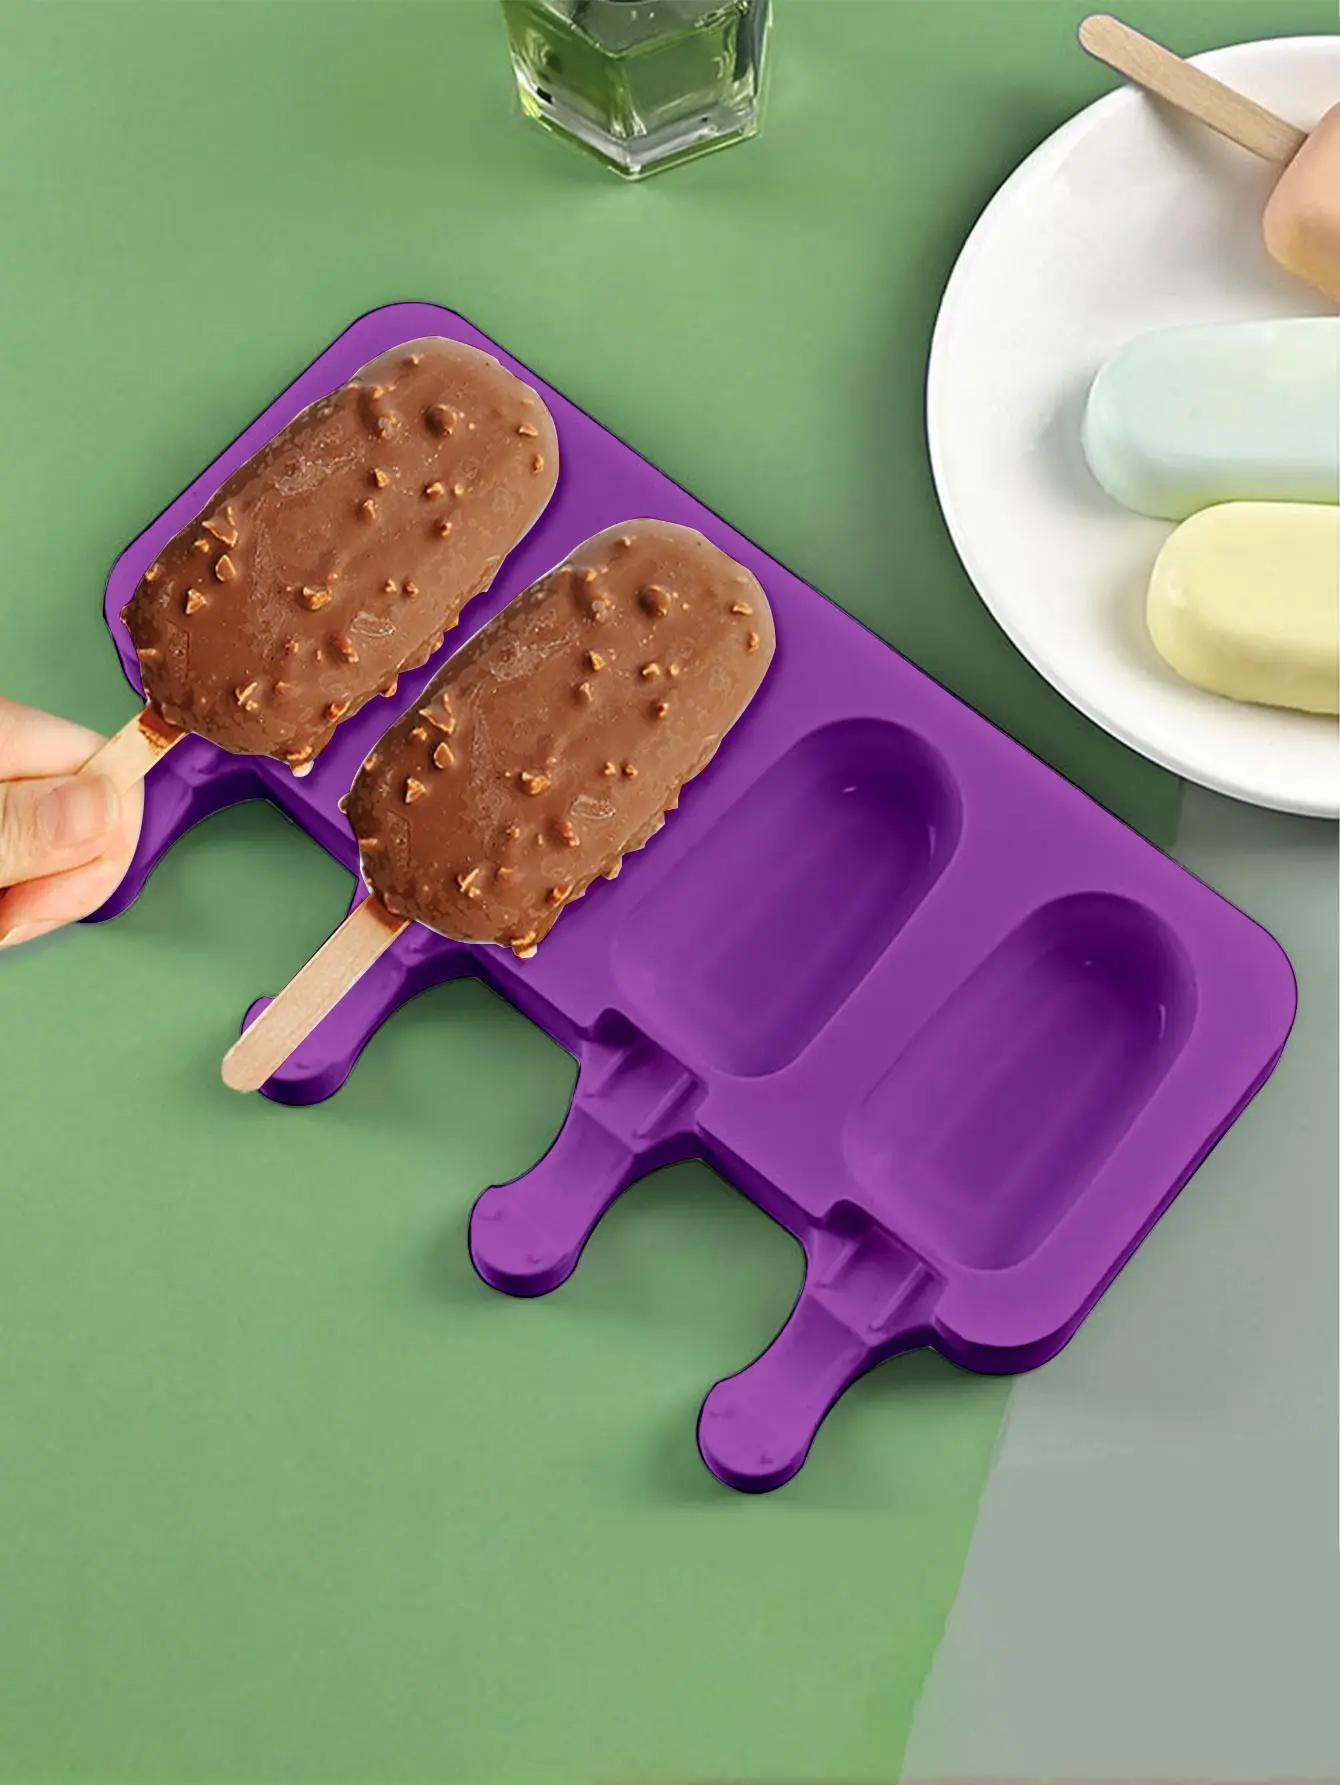 https://ae01.alicdn.com/kf/S61b4e96c59ba4973b72f7e58115fd137D/WORTHBUY-DIY-Cute-Ice-Pop-Mold-With-100-Wooden-Sticks-Reusable-Silicone-Ice-Cream-Mold-For.jpg